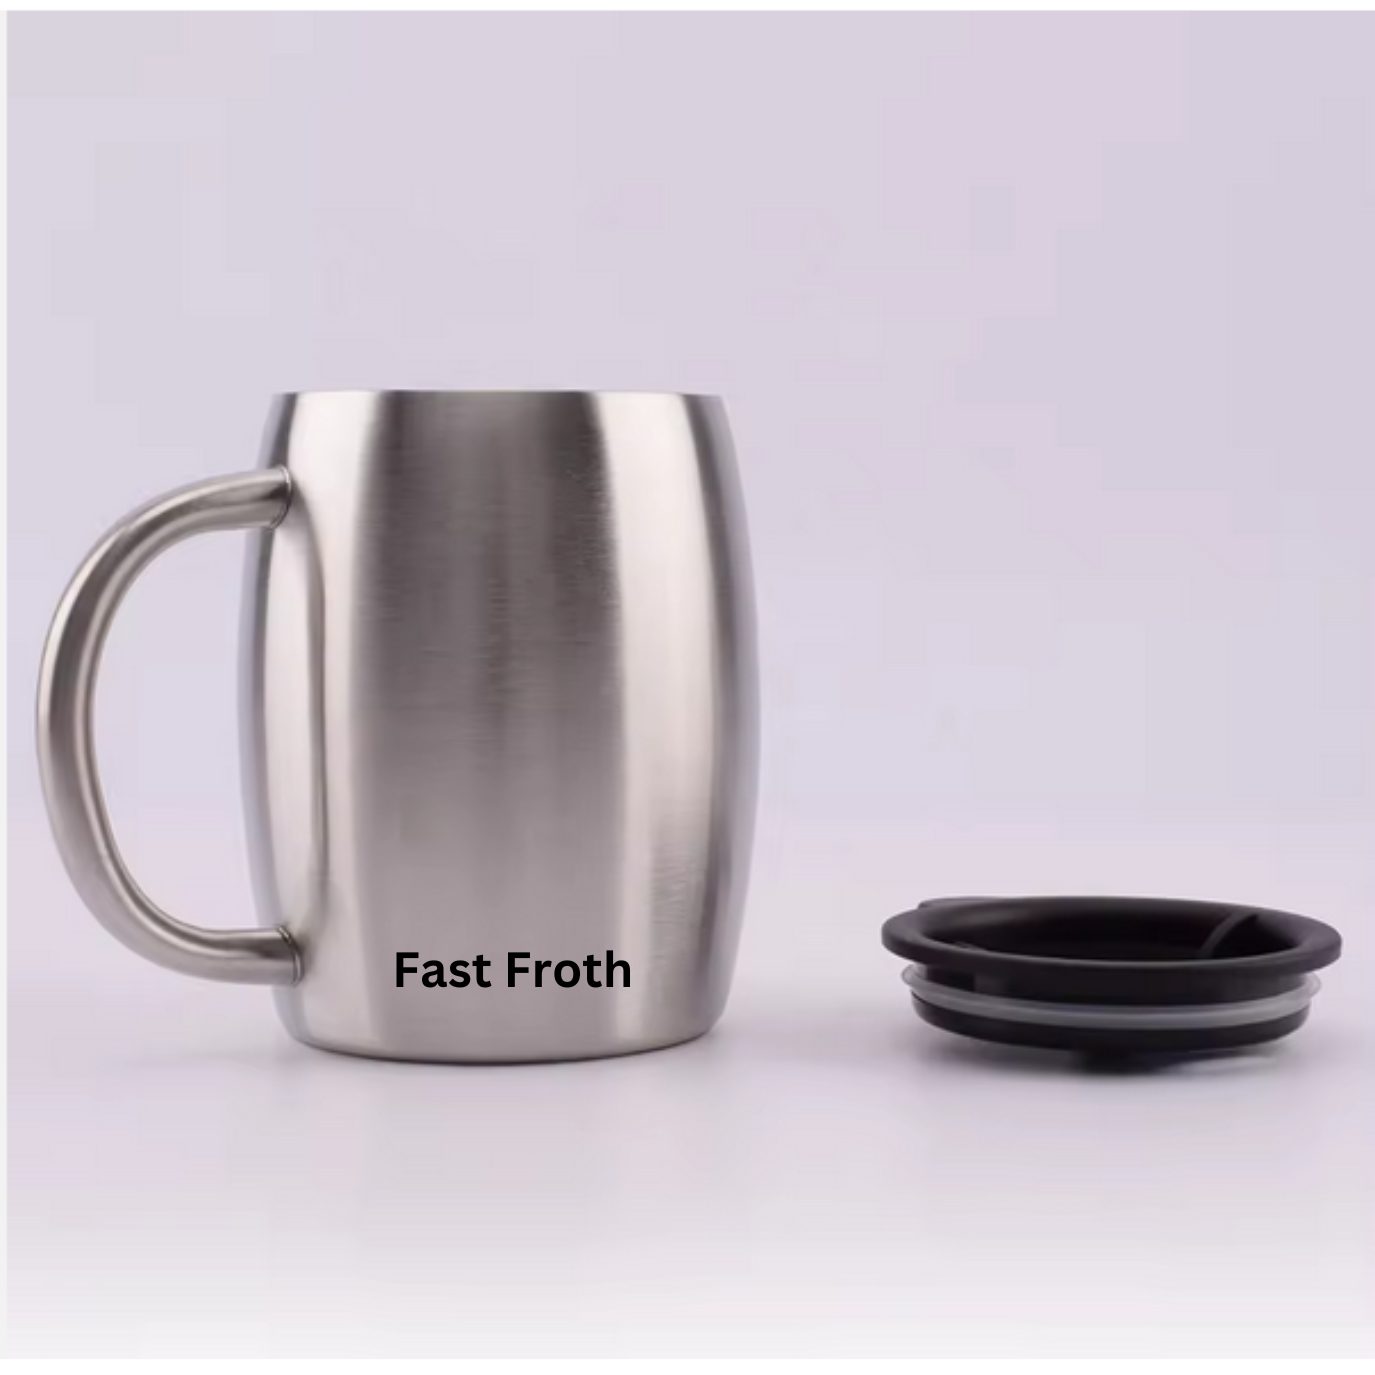 Fast Froth Stainless Steel Coffee Tumbler Mug